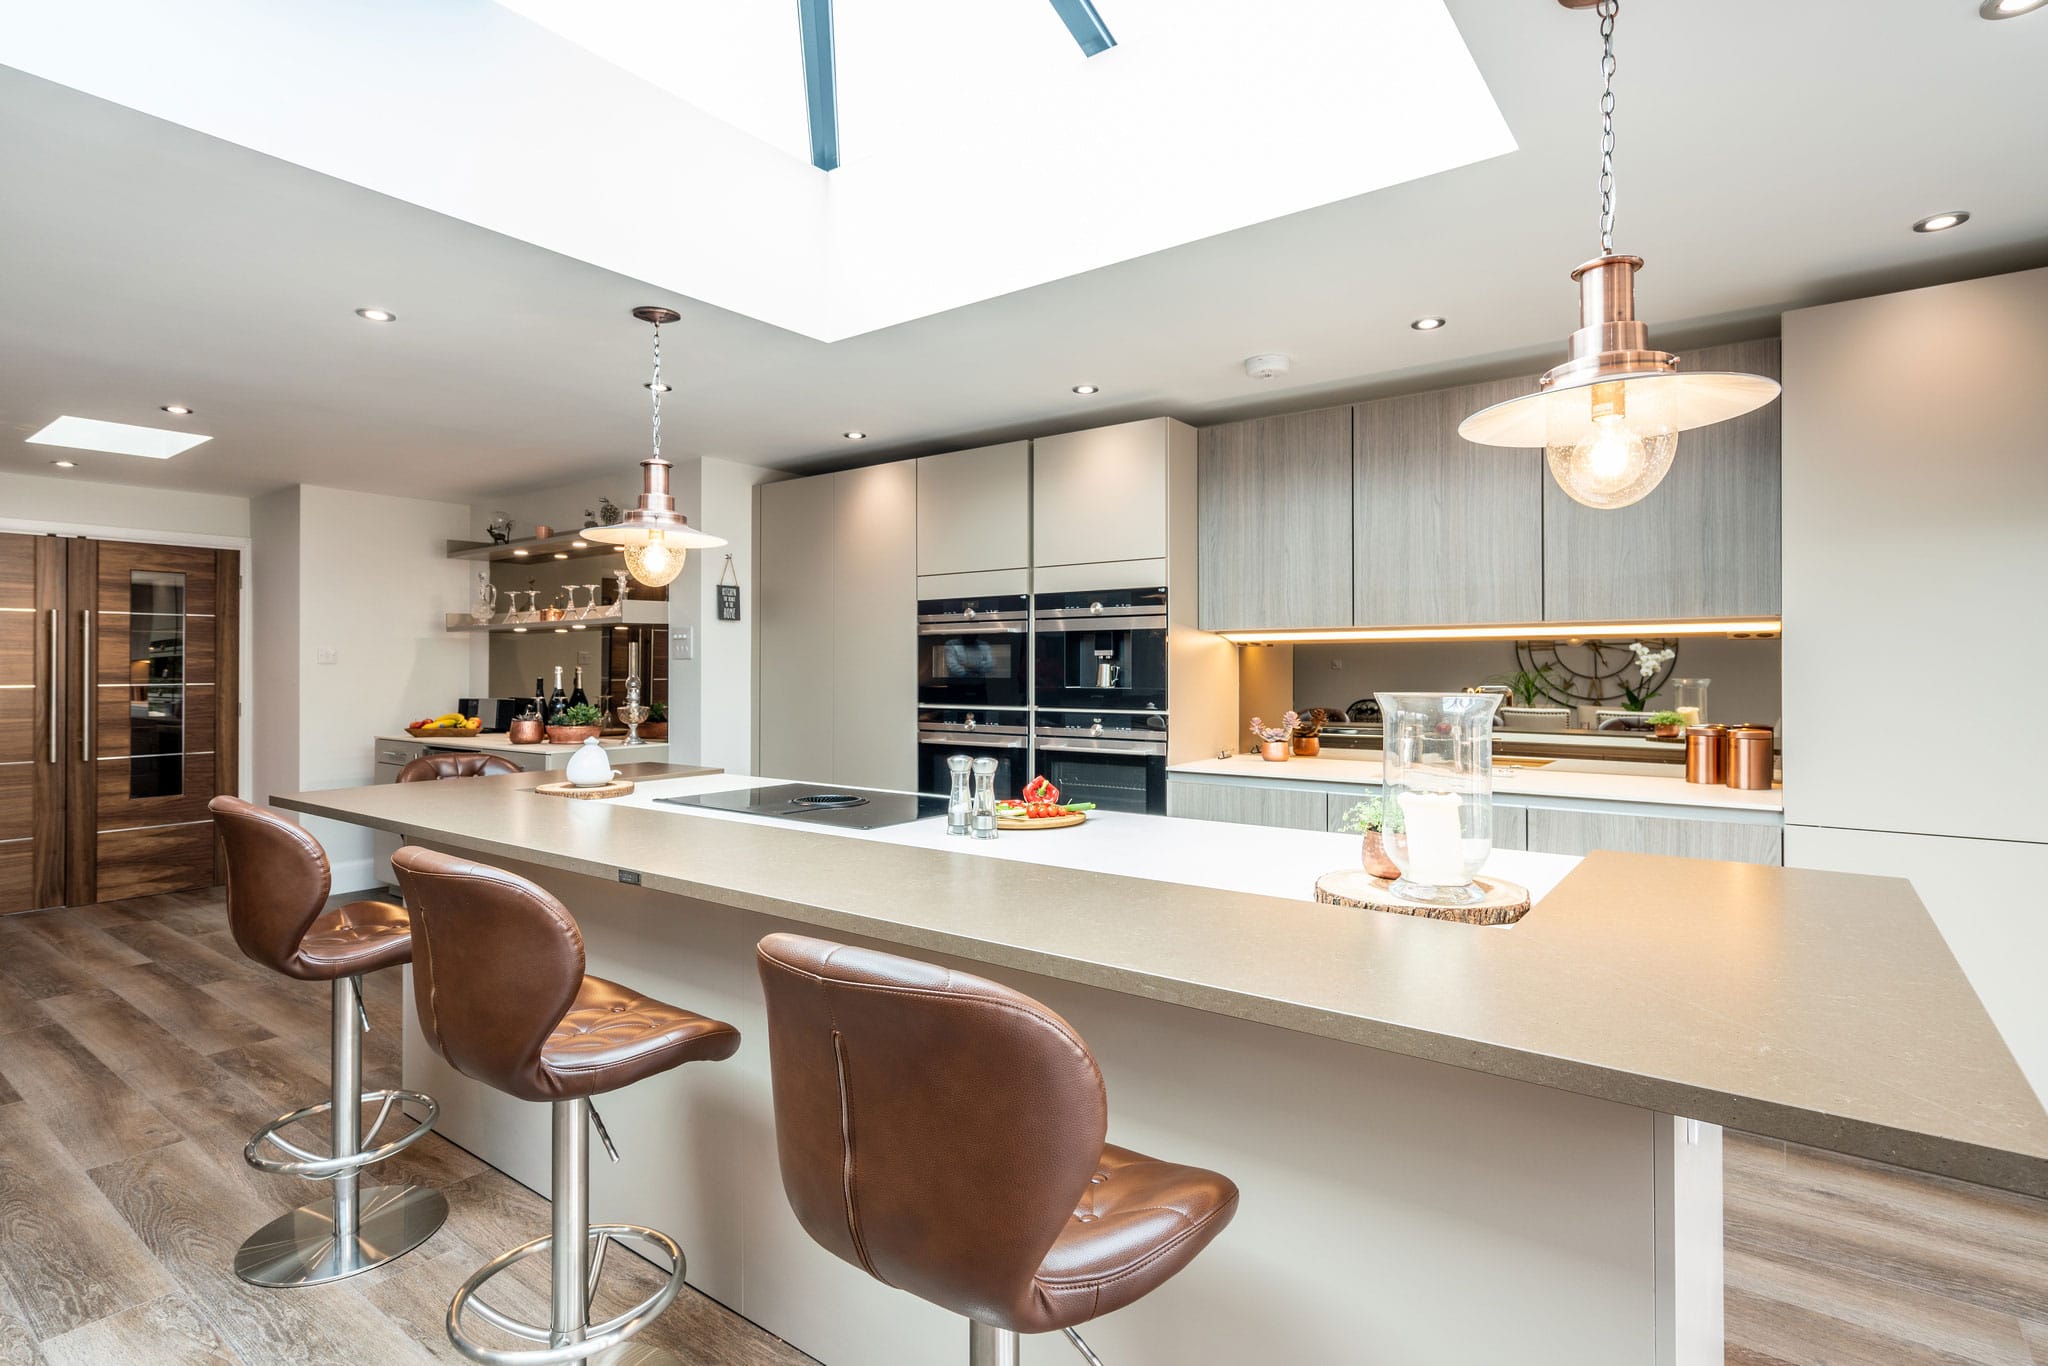 Image of Myers Touch Daniels Kitchen 01038 ZF 2442 14358 1 034 in A space designed for socializing - Cosentino